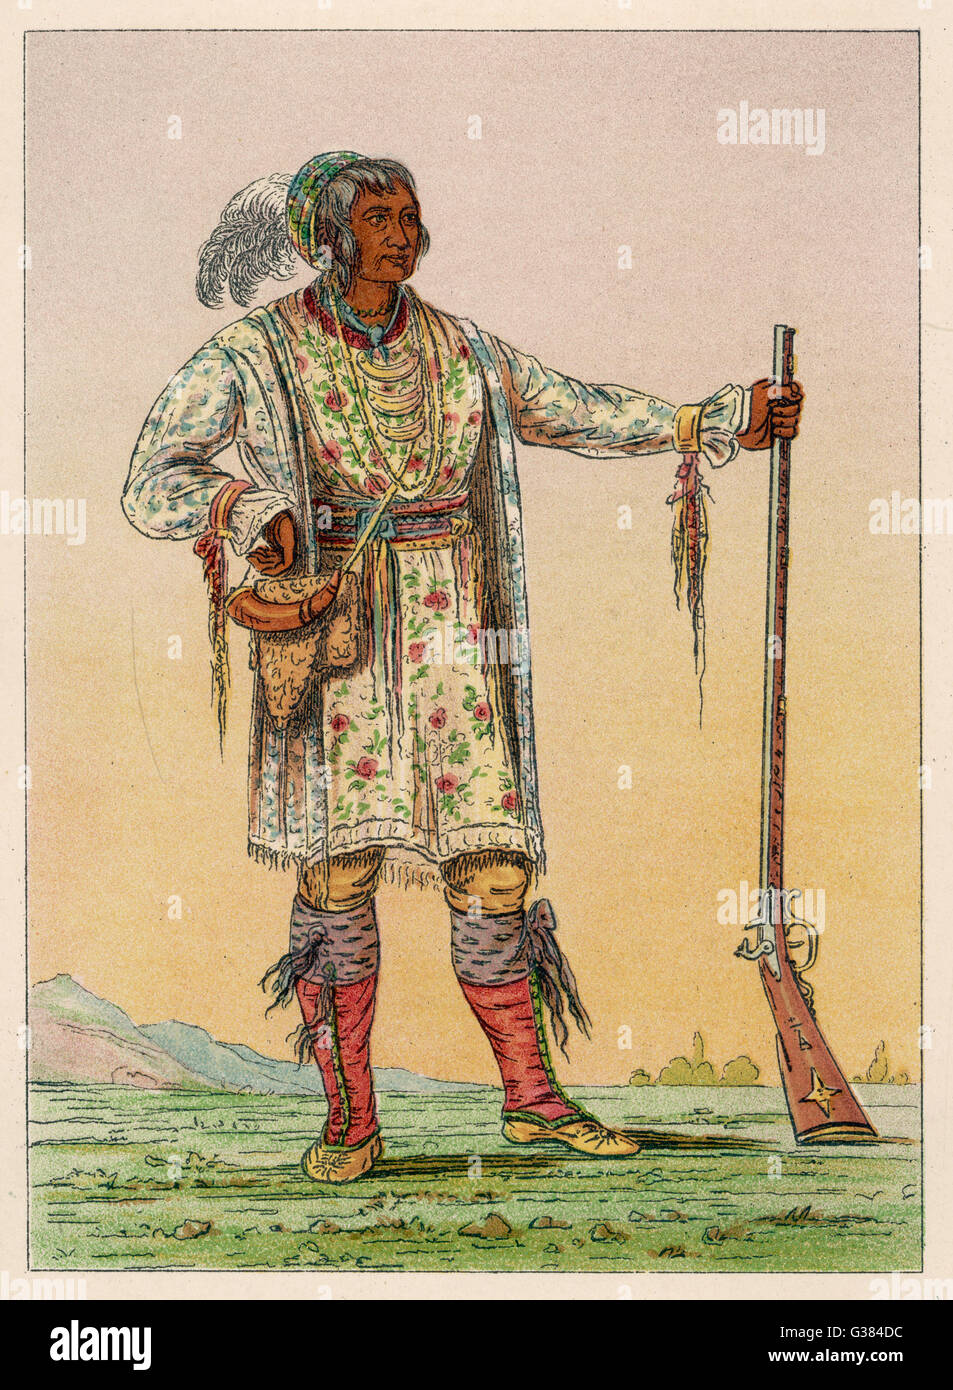 Chief of the Seminoles in  Florida during the Seminole  War        Date: 1804? - 1838 Stock Photo